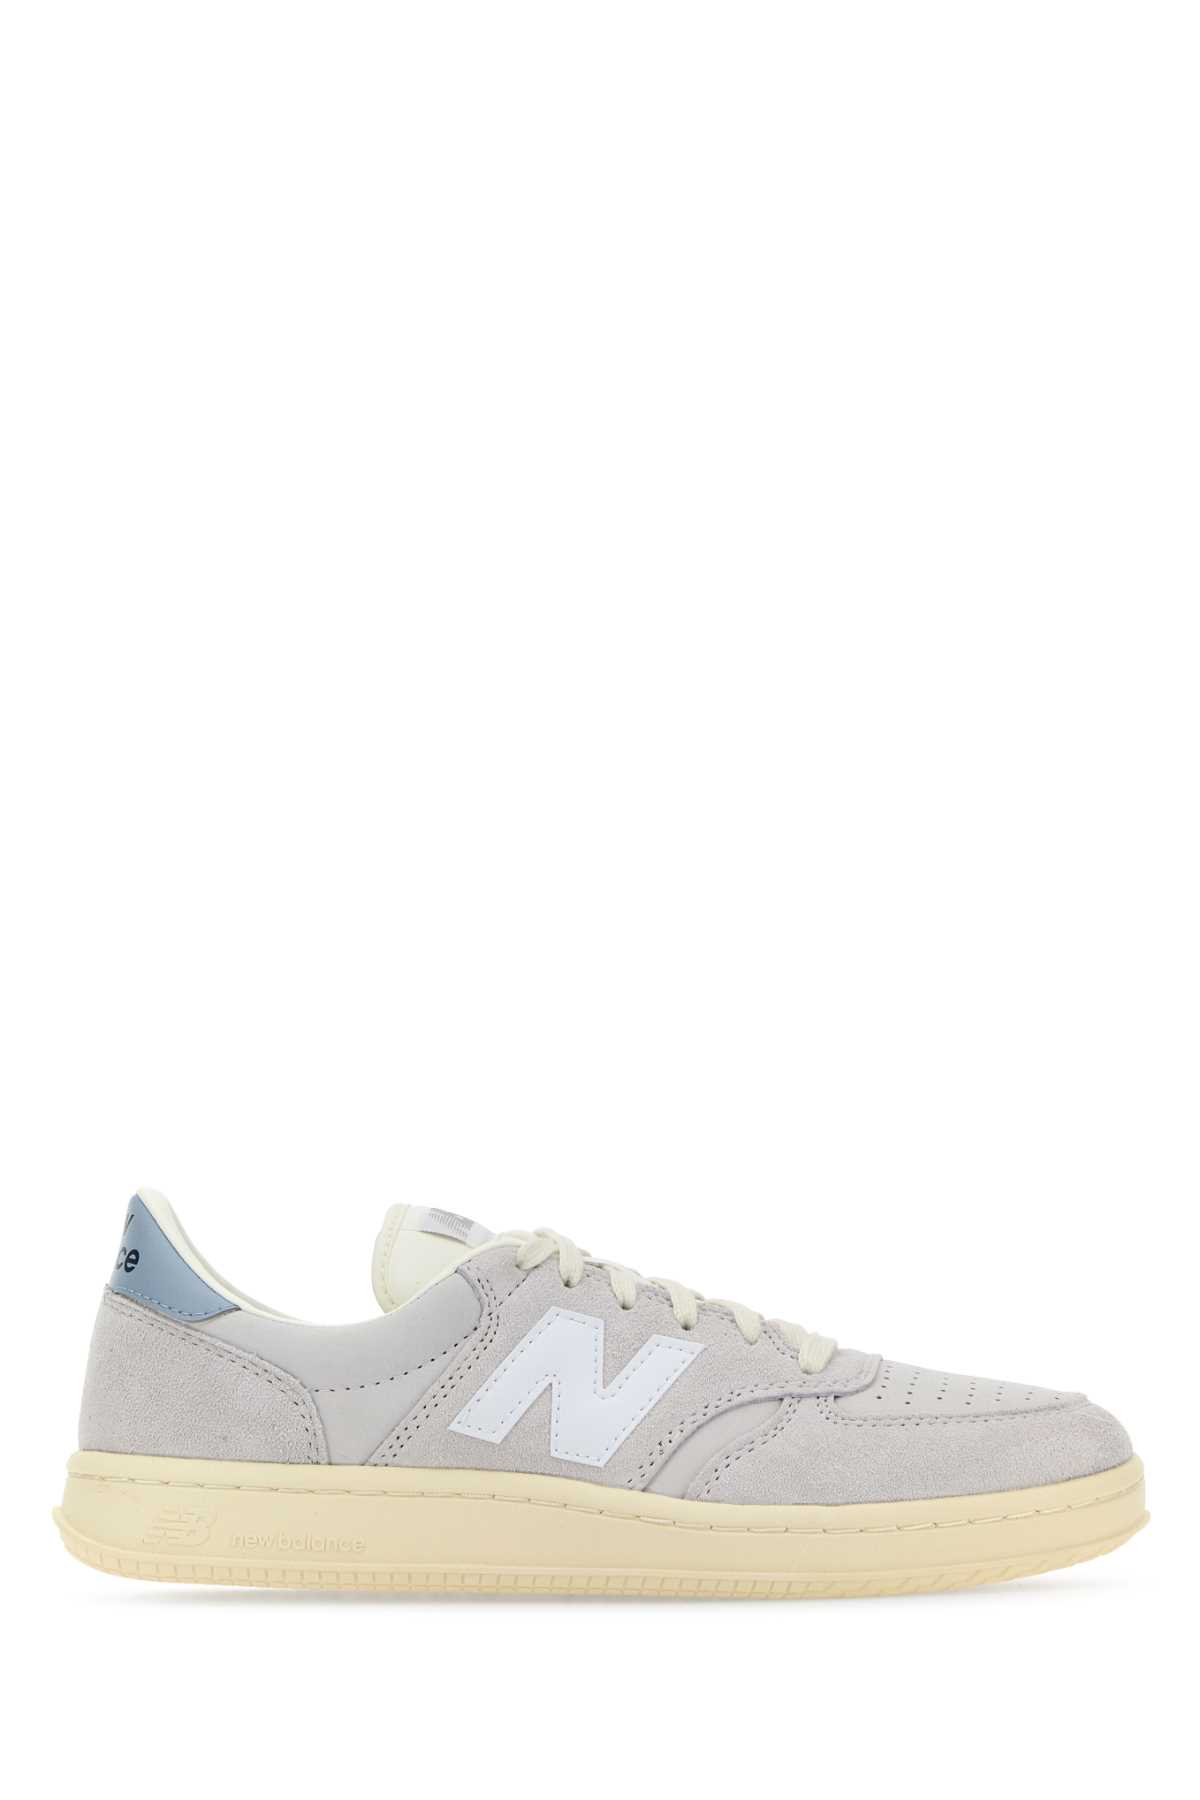 Shop New Balance Light Grey Suede T500 Sneakers In Offwhite